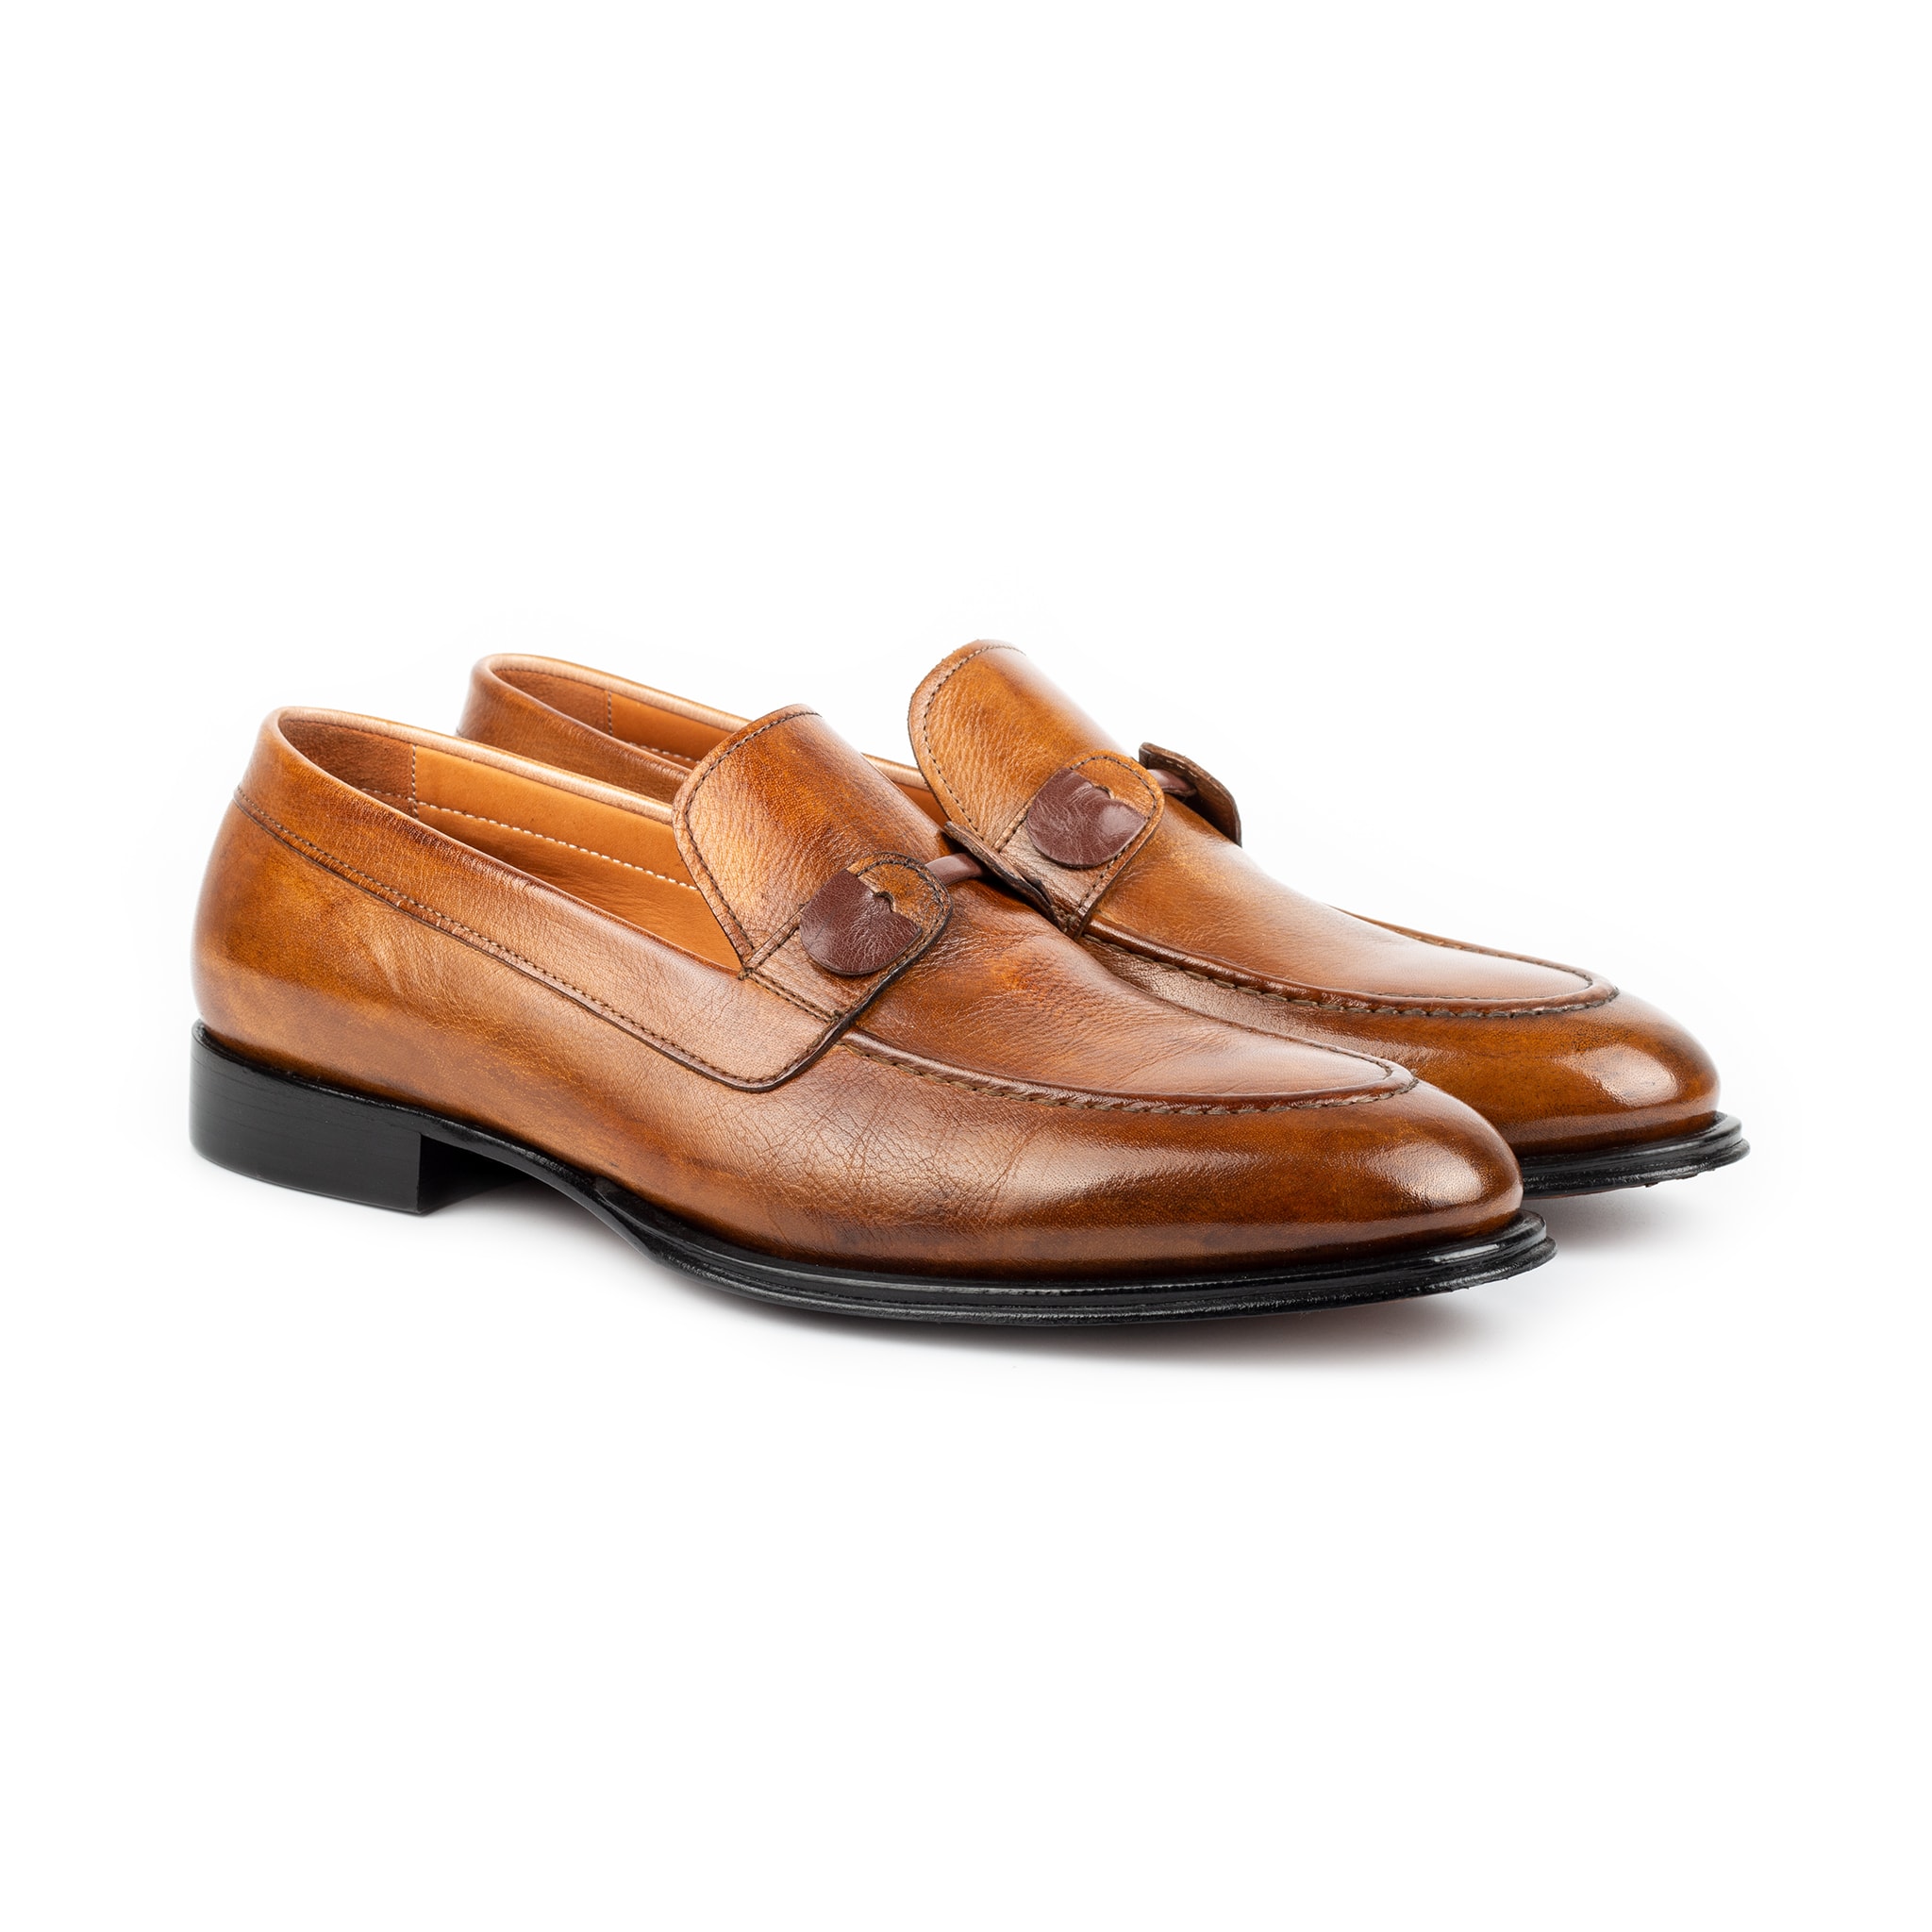 TAHAN | TOBACCO | Zerbay Handcrafted Leather Shoes